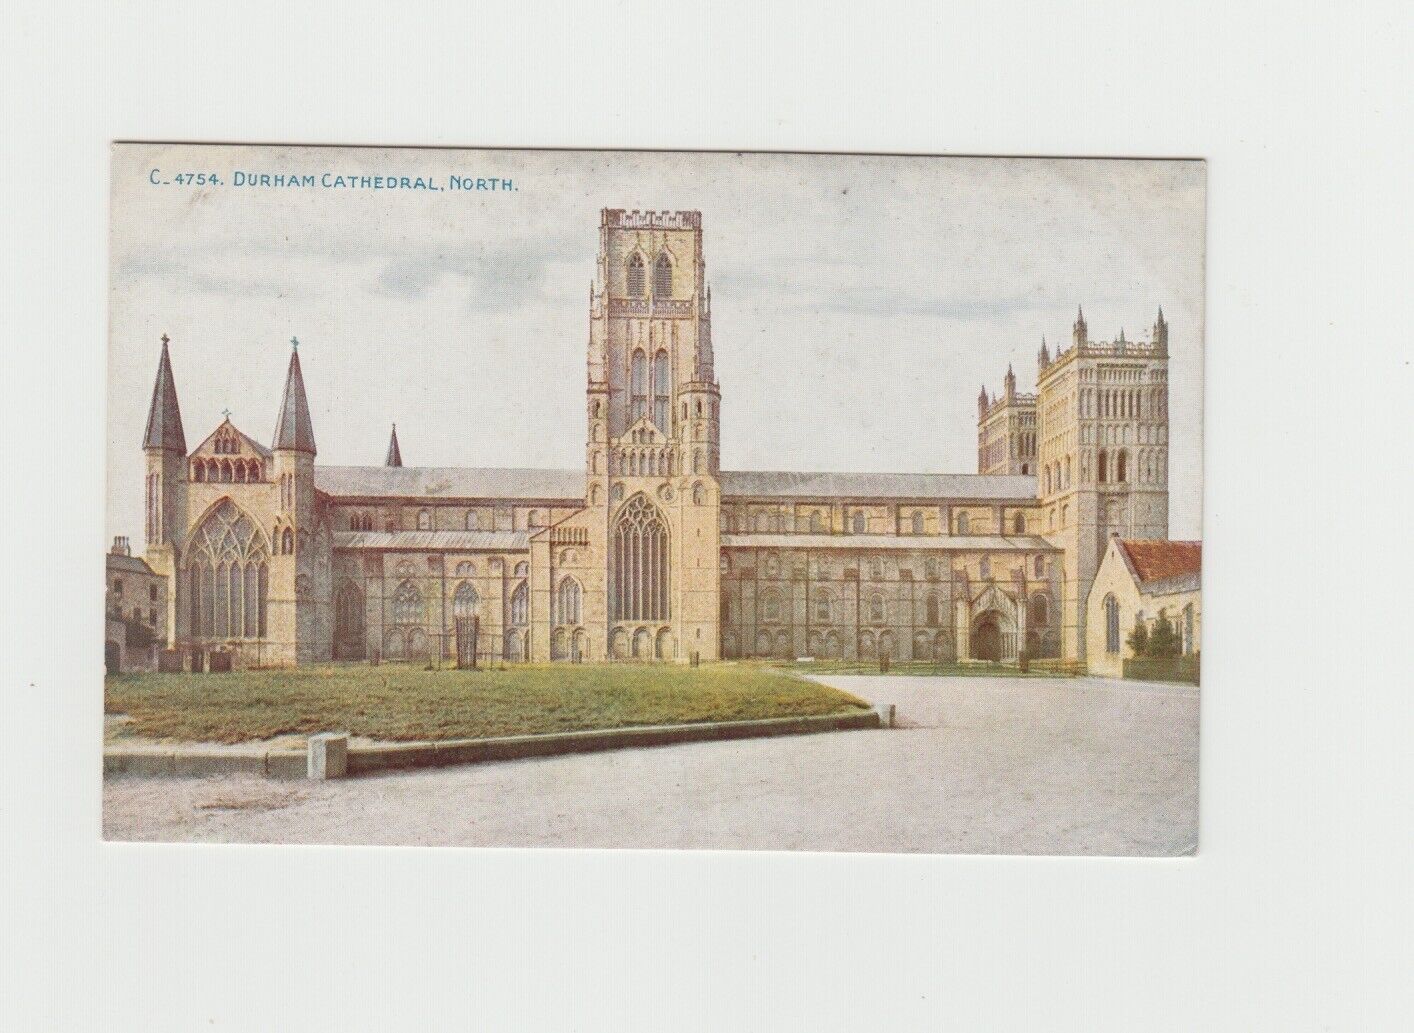 House Clearance - Durham Cathedral, North - Celesque 4754